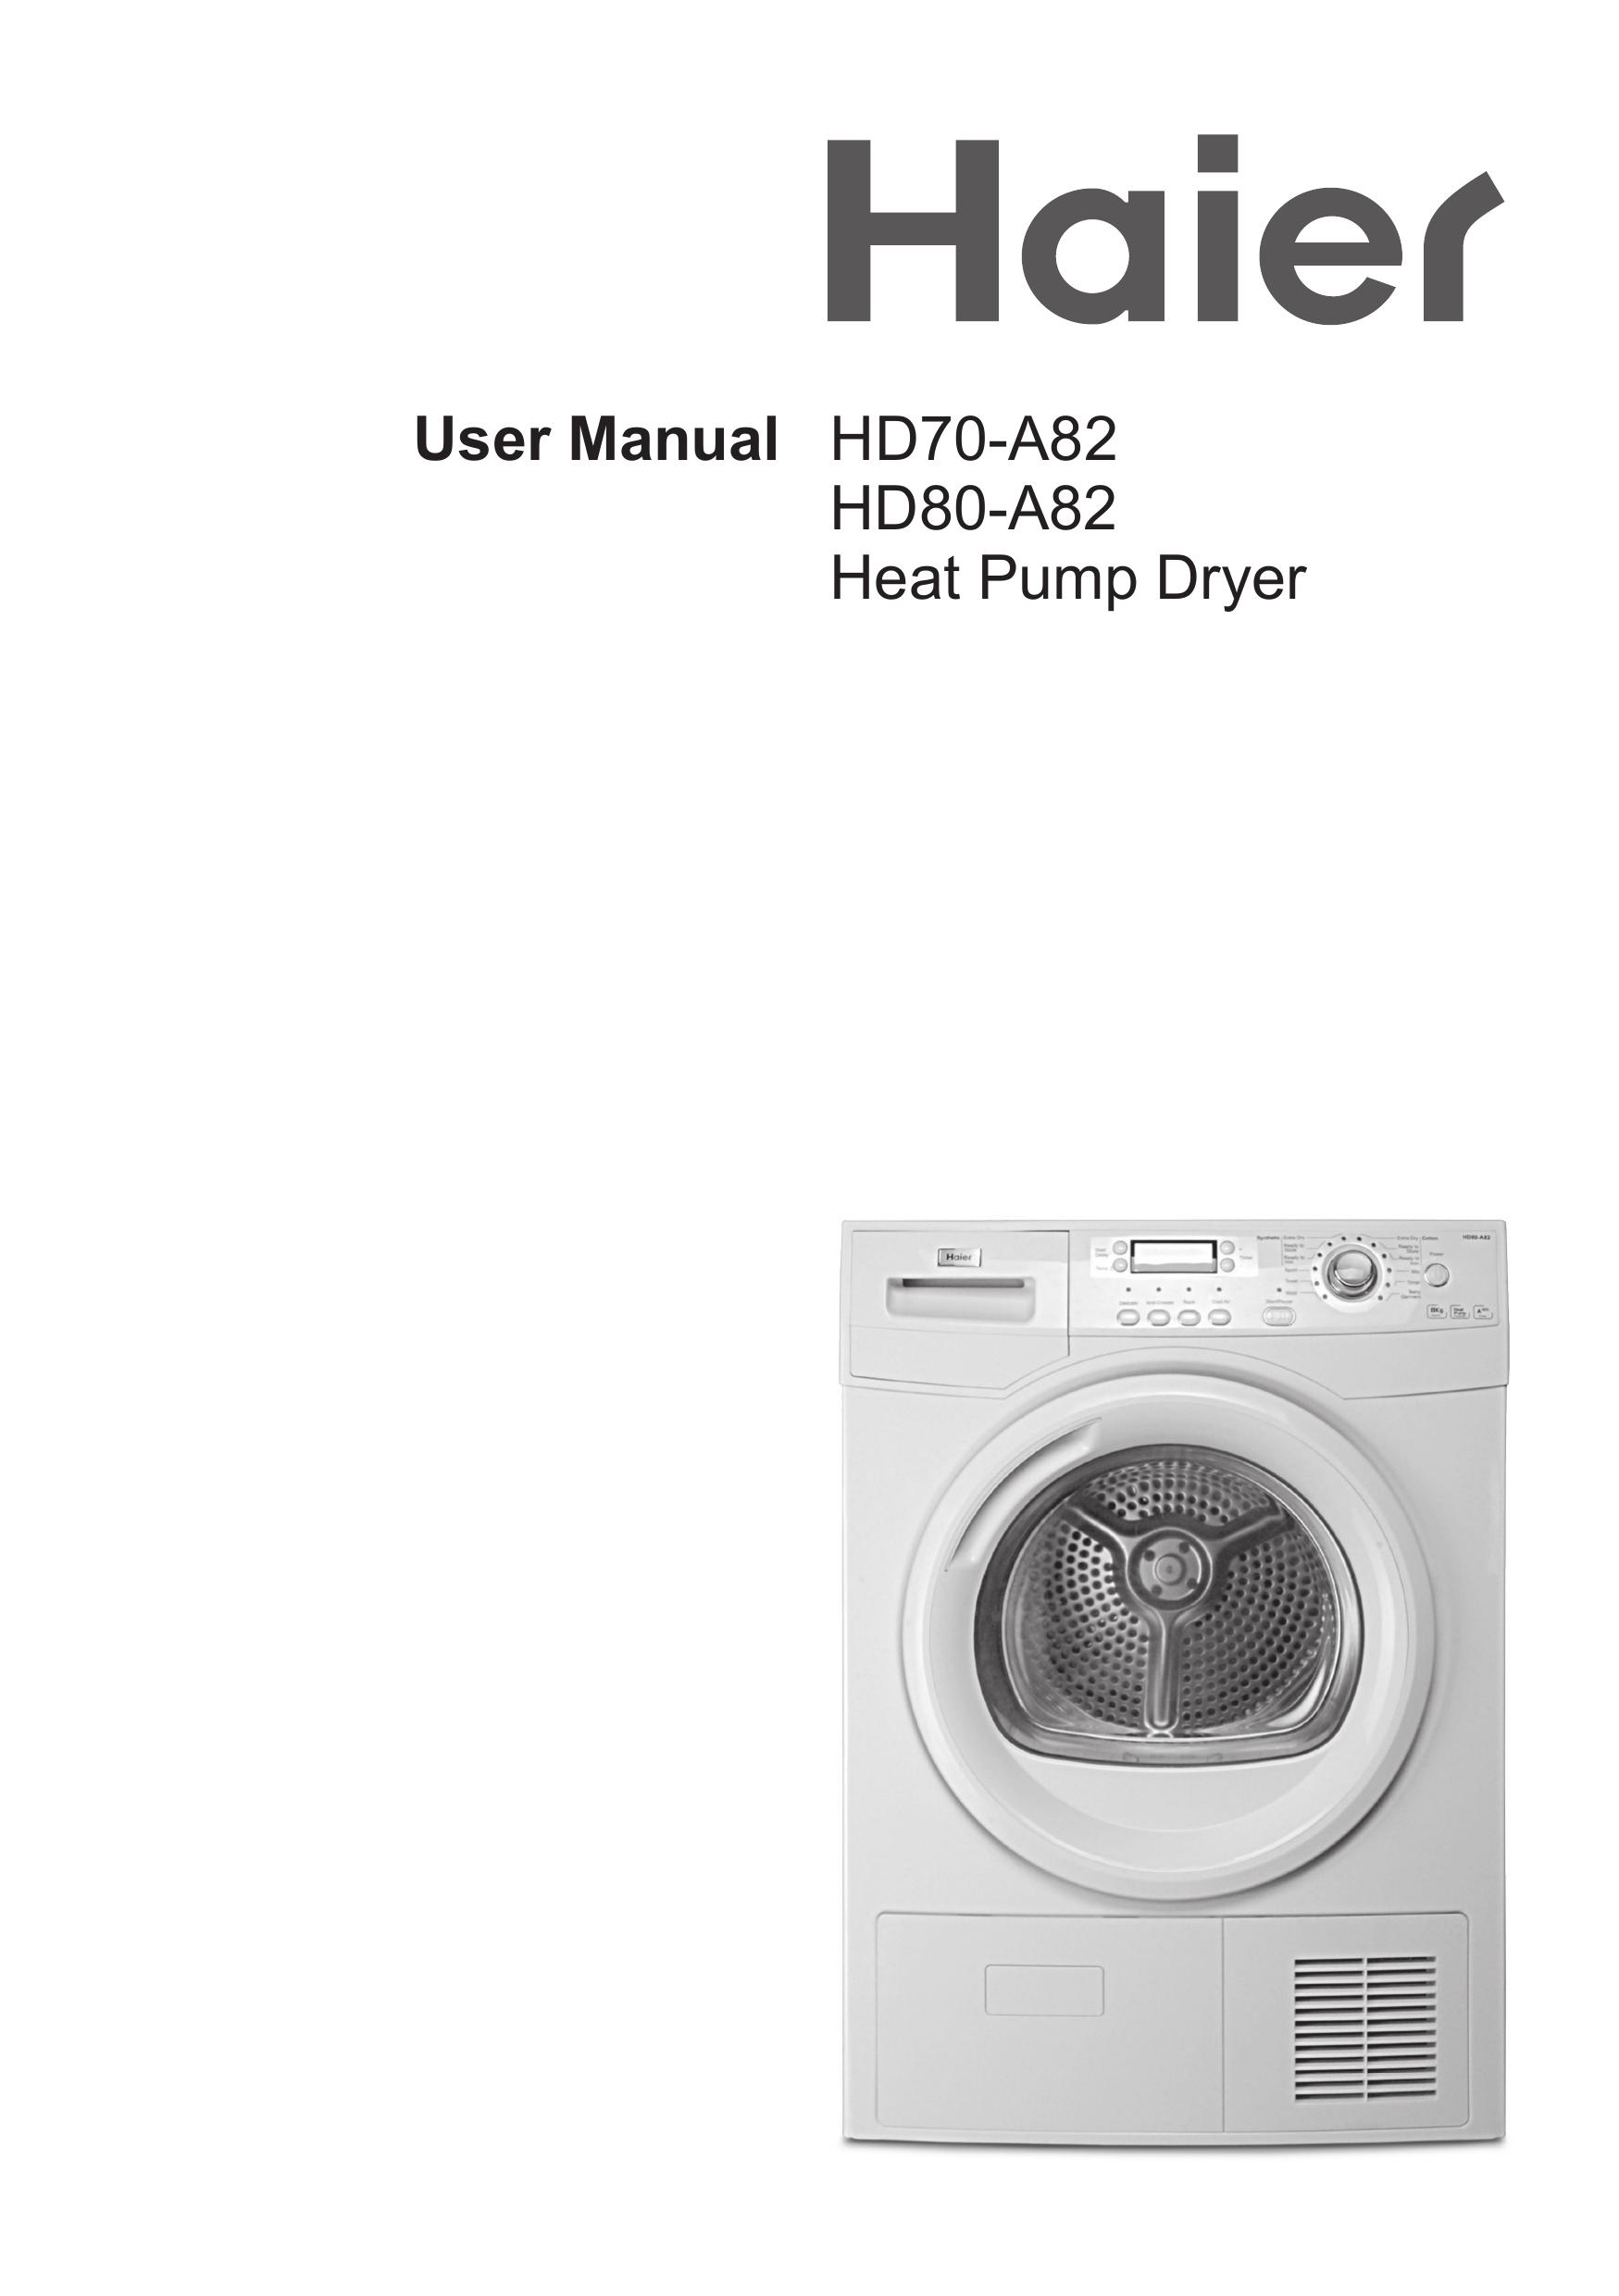 Haier HD70-A82 Washer/Dryer User Manual